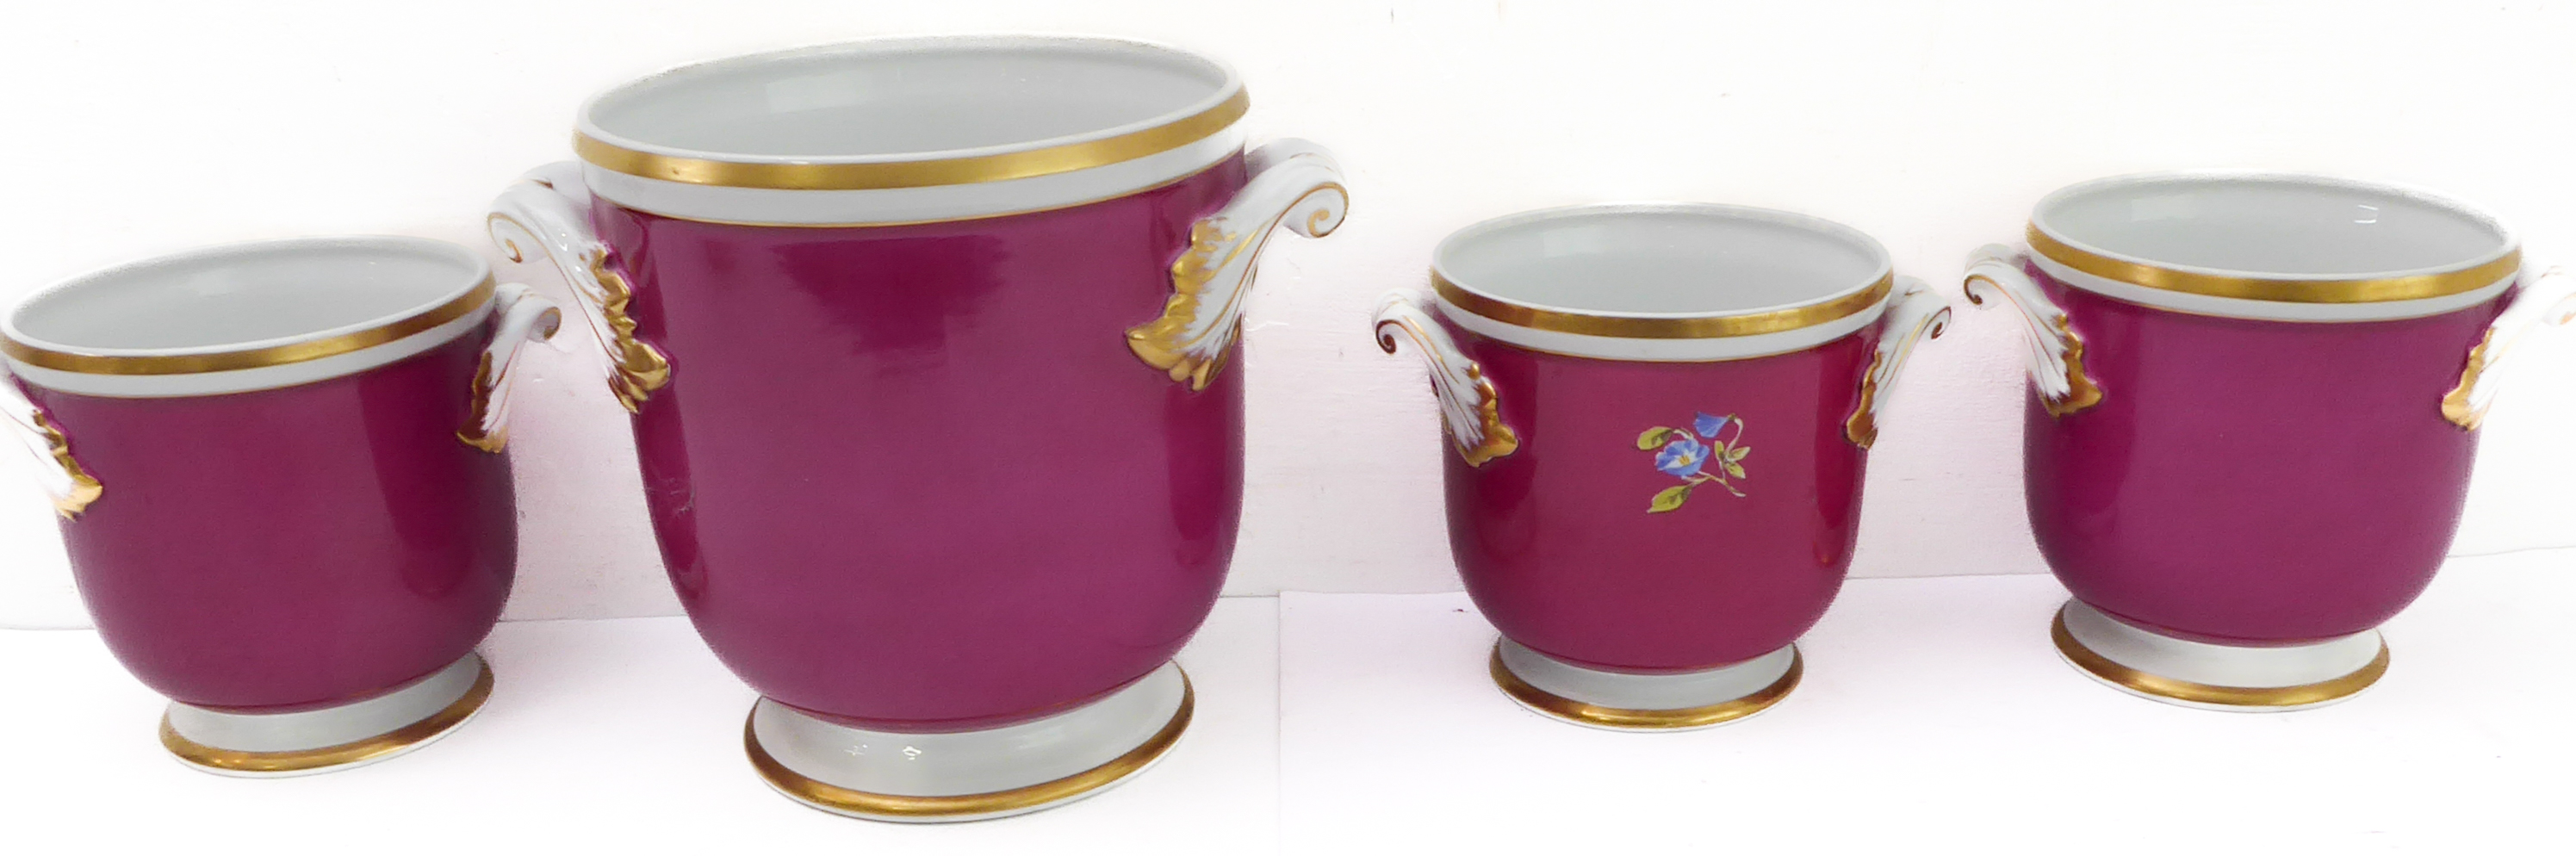 A large two-handled Portuguese porcelain cachepot; hand gilded and decorated with floral sprays ( - Image 2 of 5